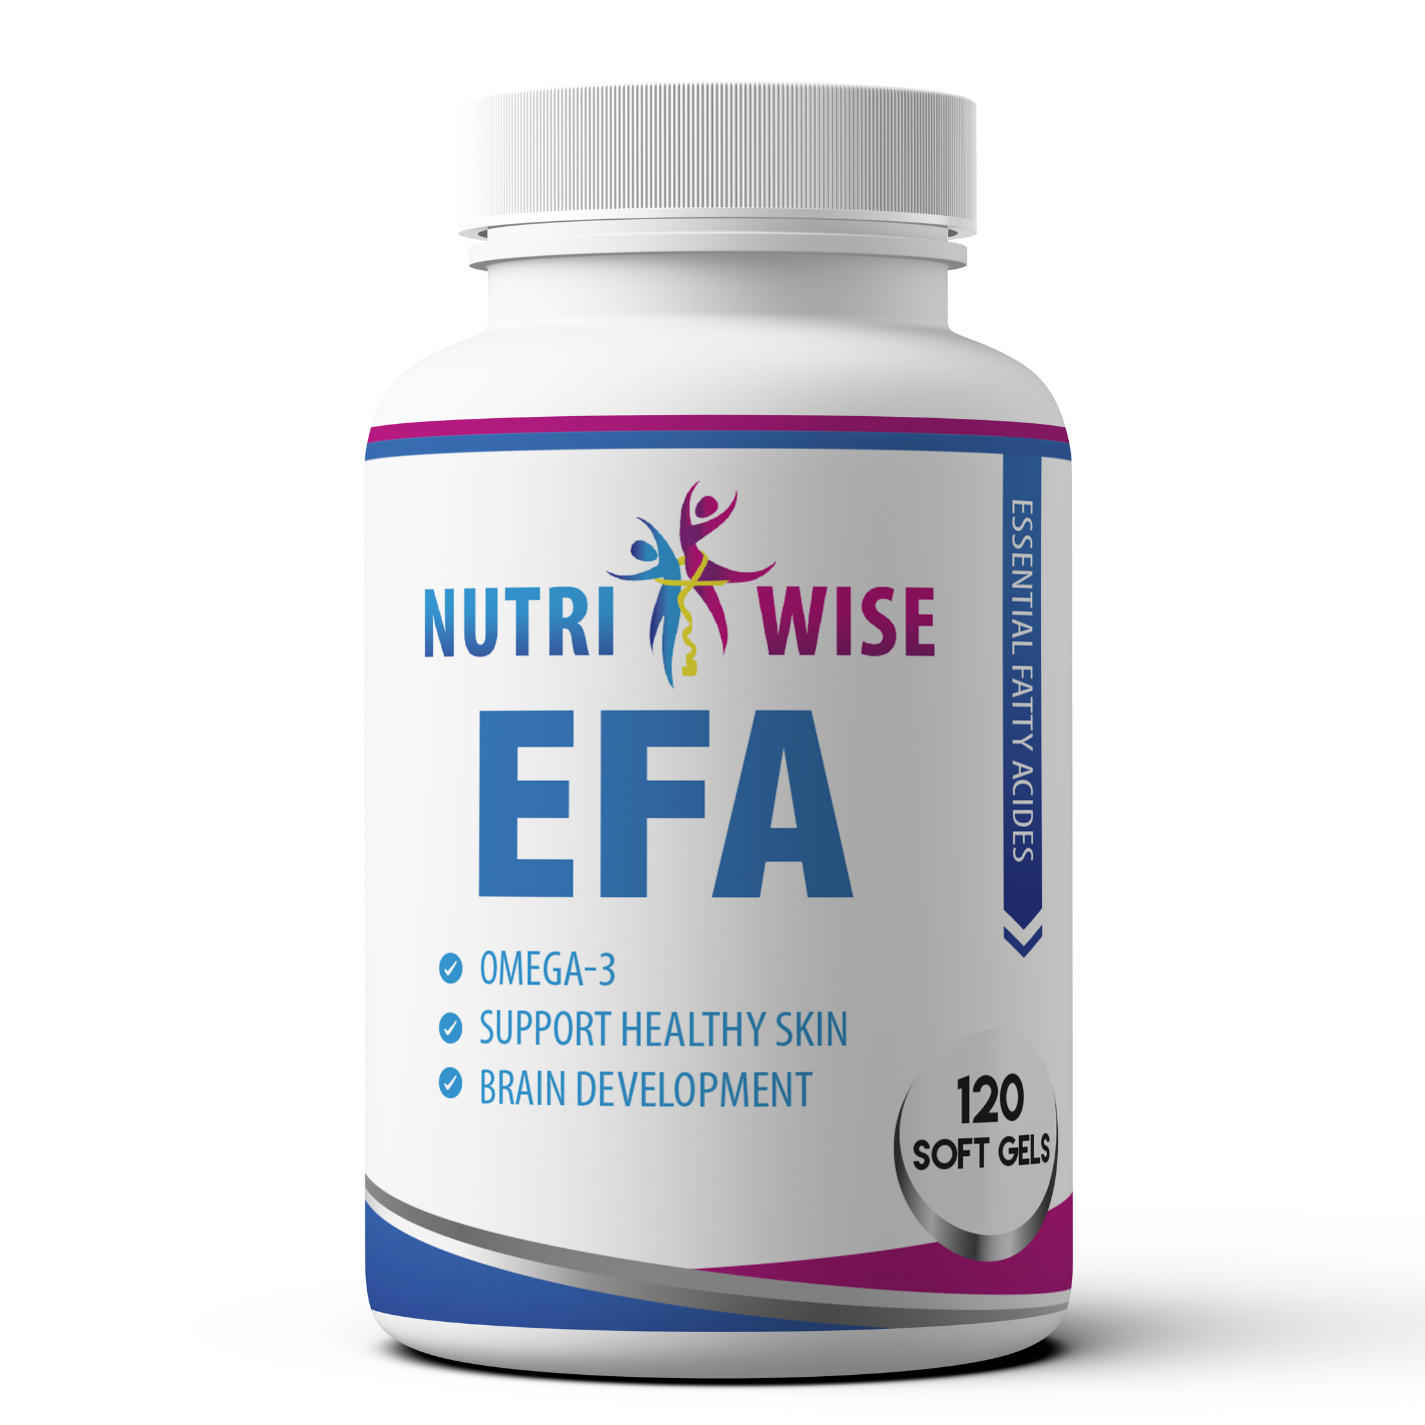 NutriWise EFA (120ct) - Doctors Weight Loss